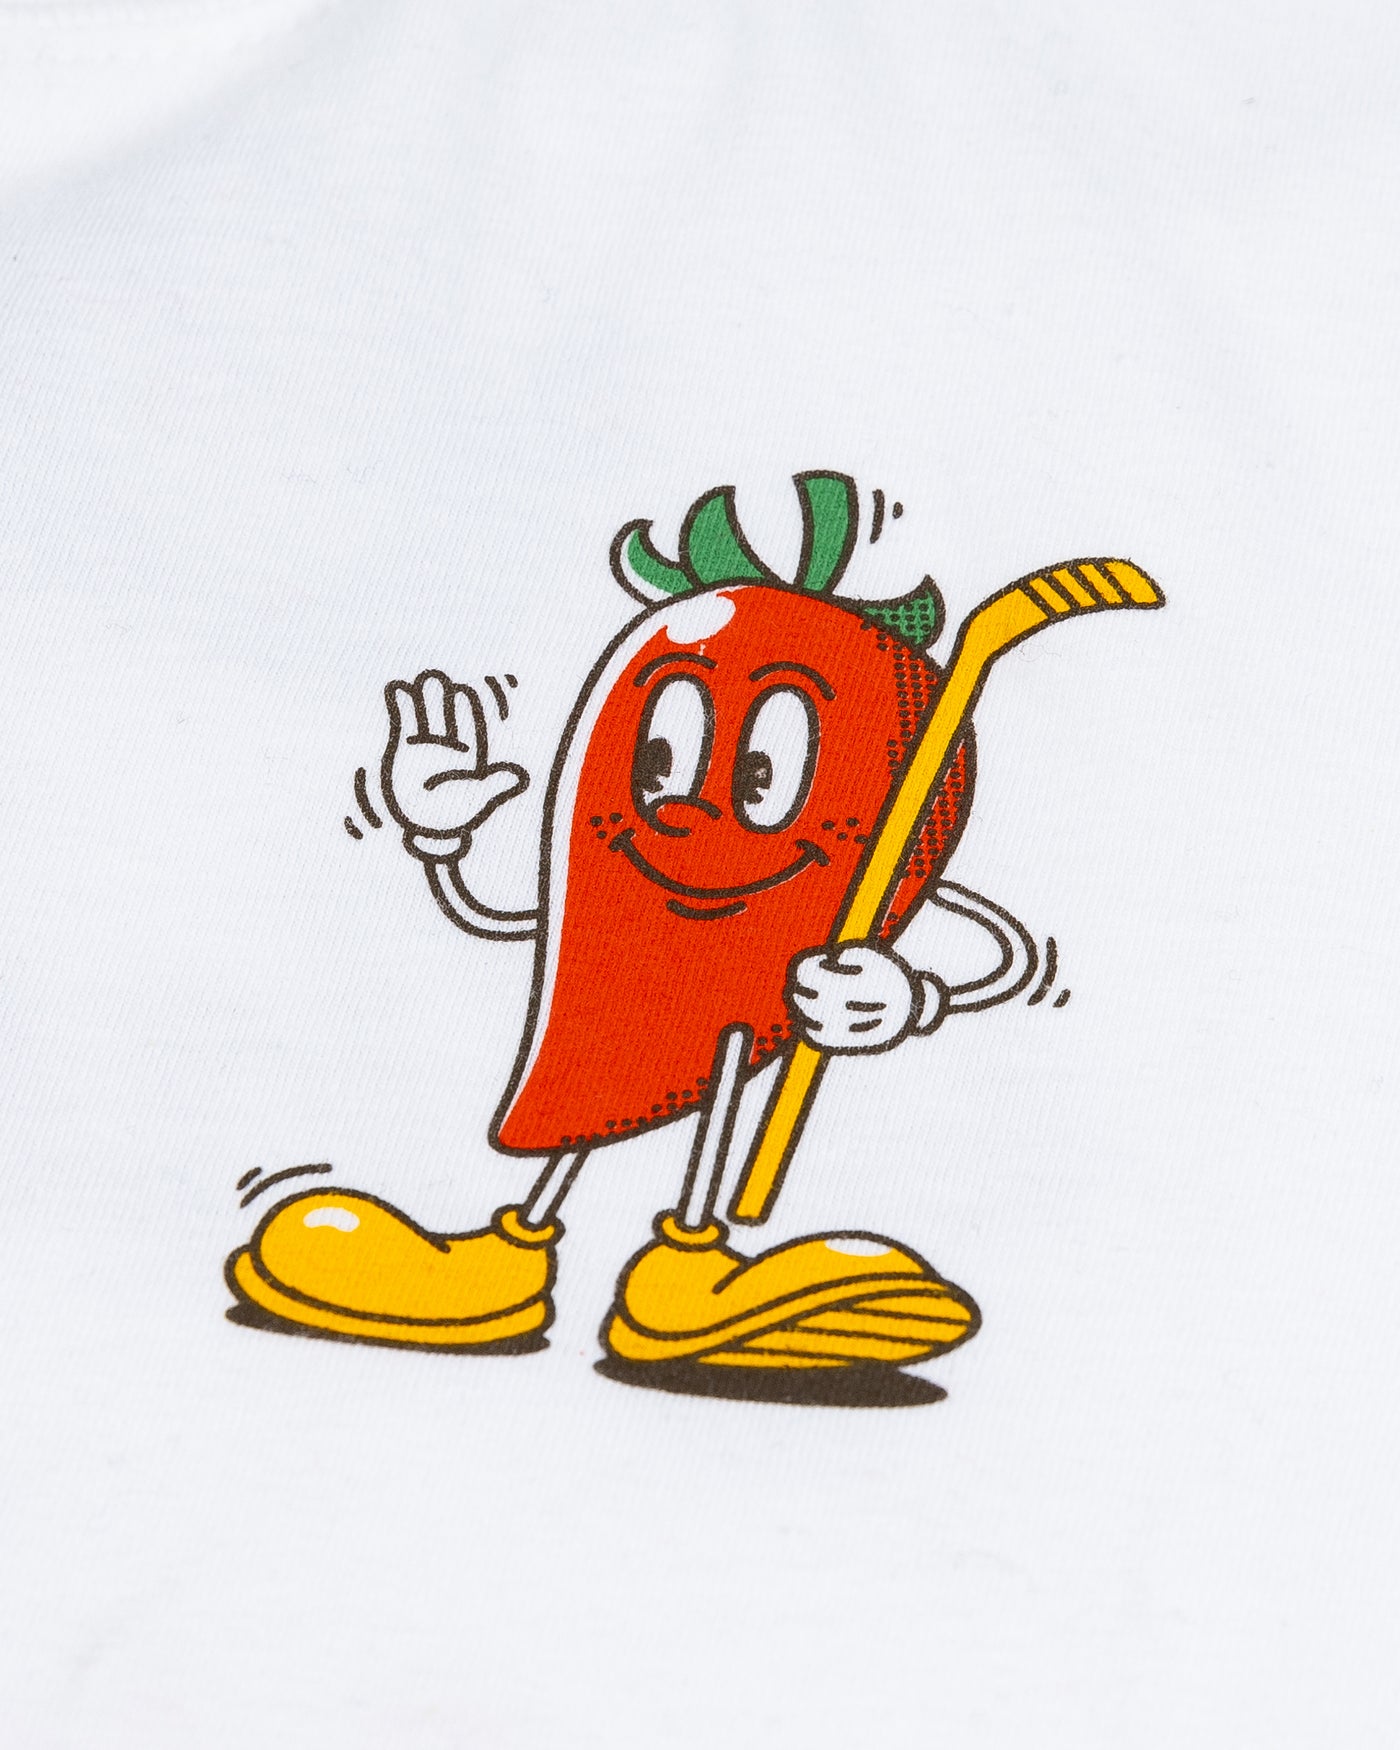 white tee with Cheli's Chili Bar branding and graphics on back and chili pepper mascot on left front - front detail lay flat